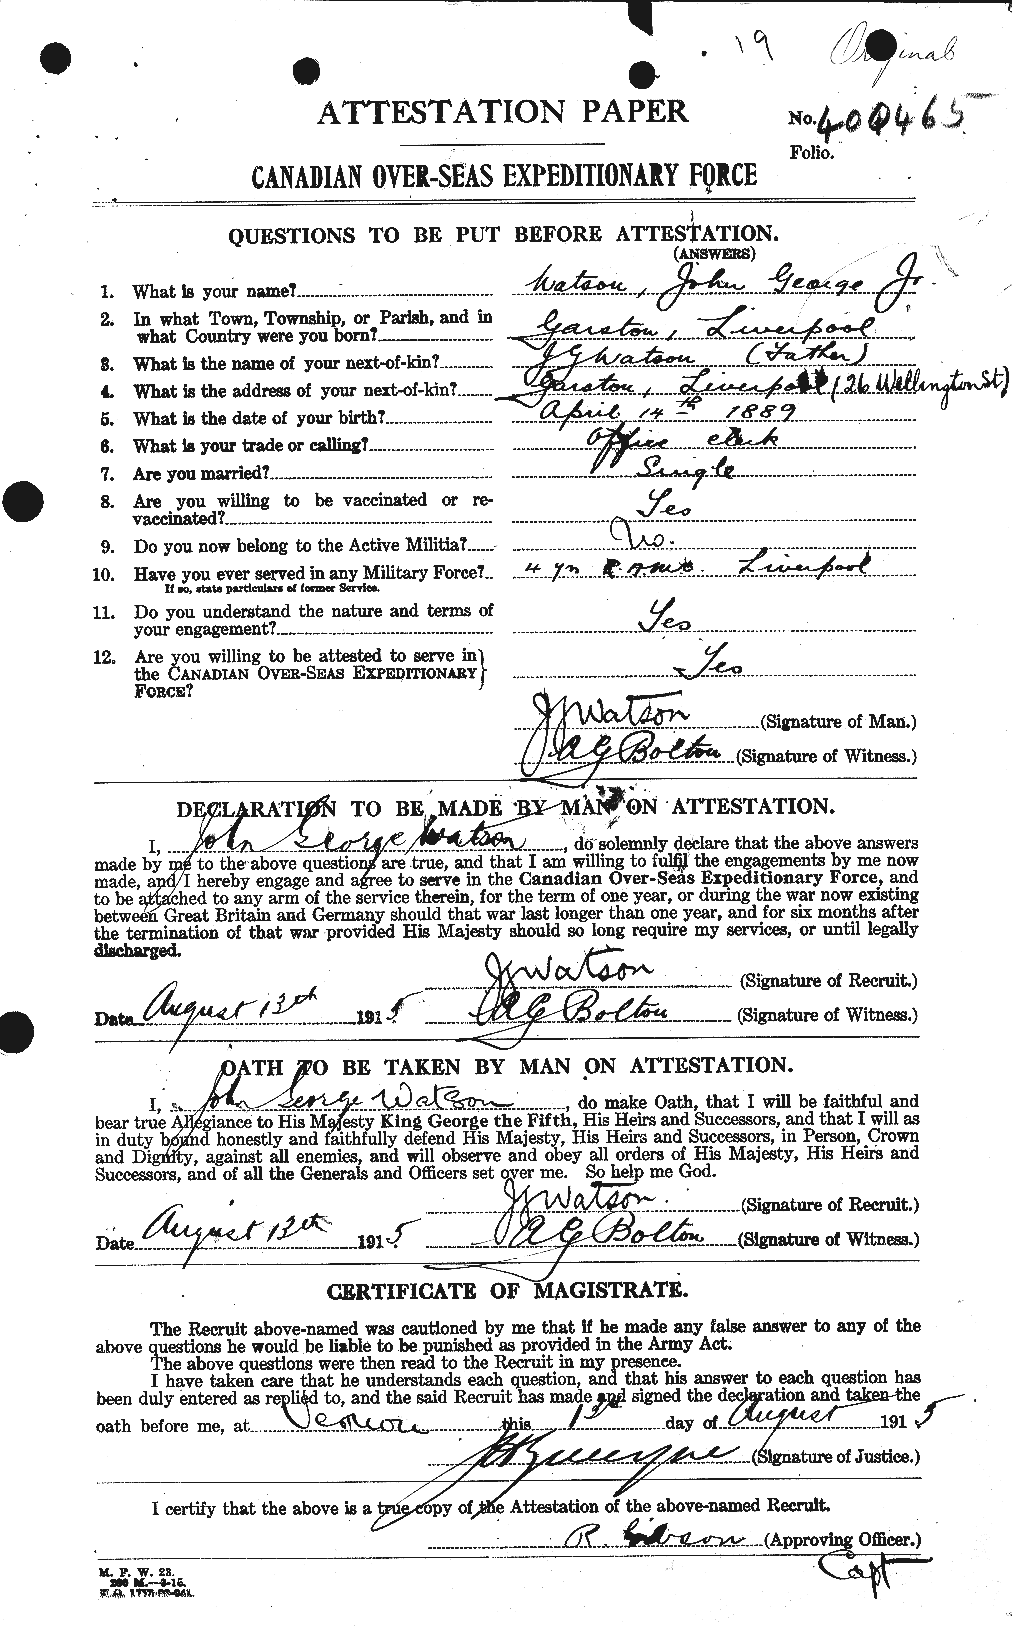 Personnel Records of the First World War - CEF 659054a